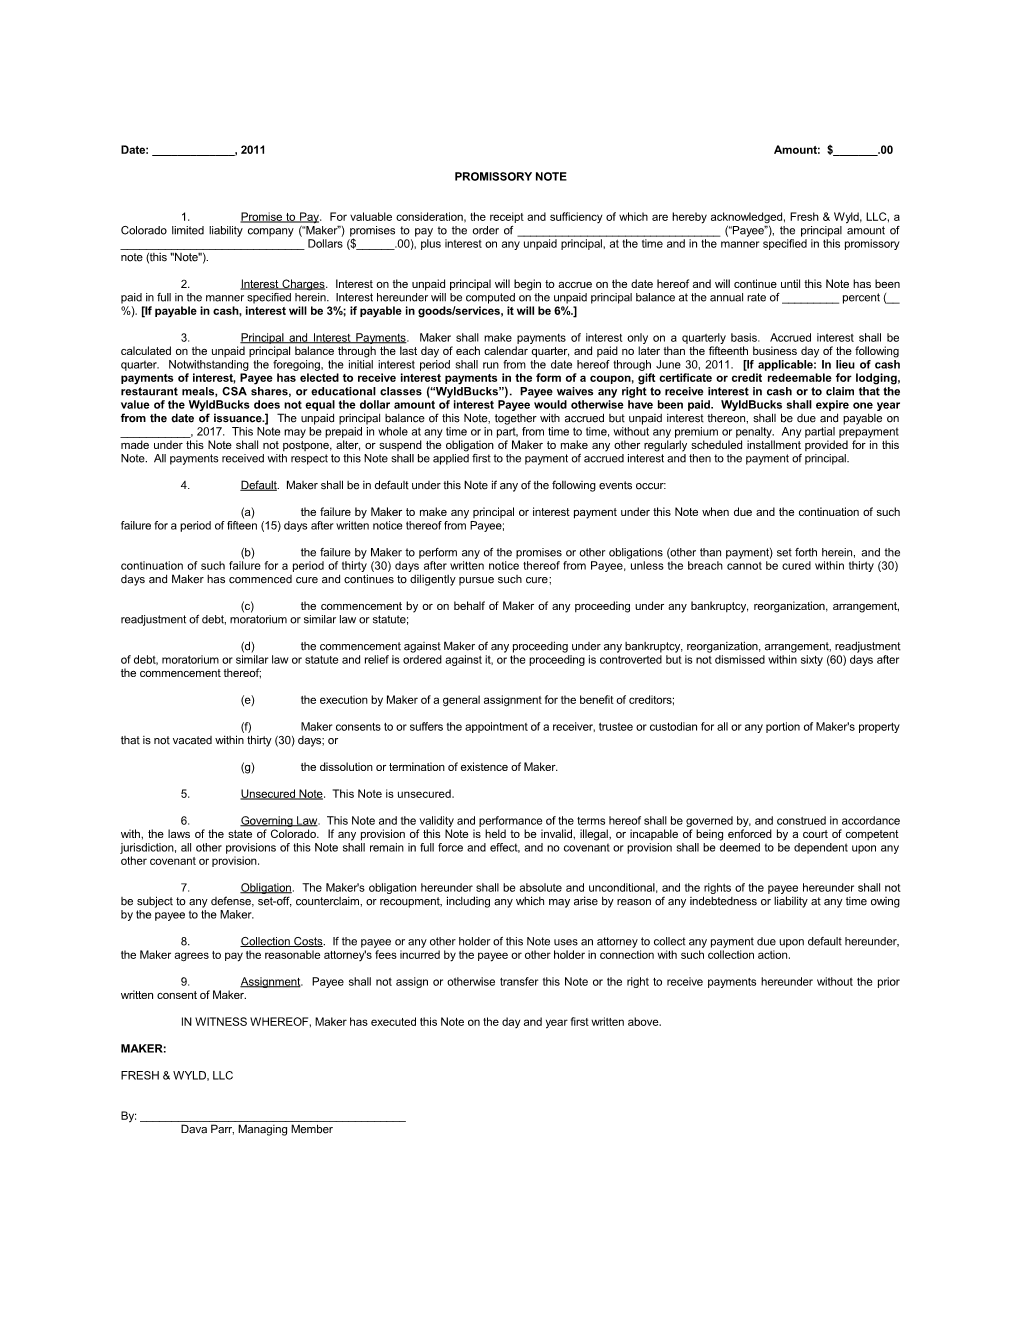 Promissory Note (Short Form) (238401;1)